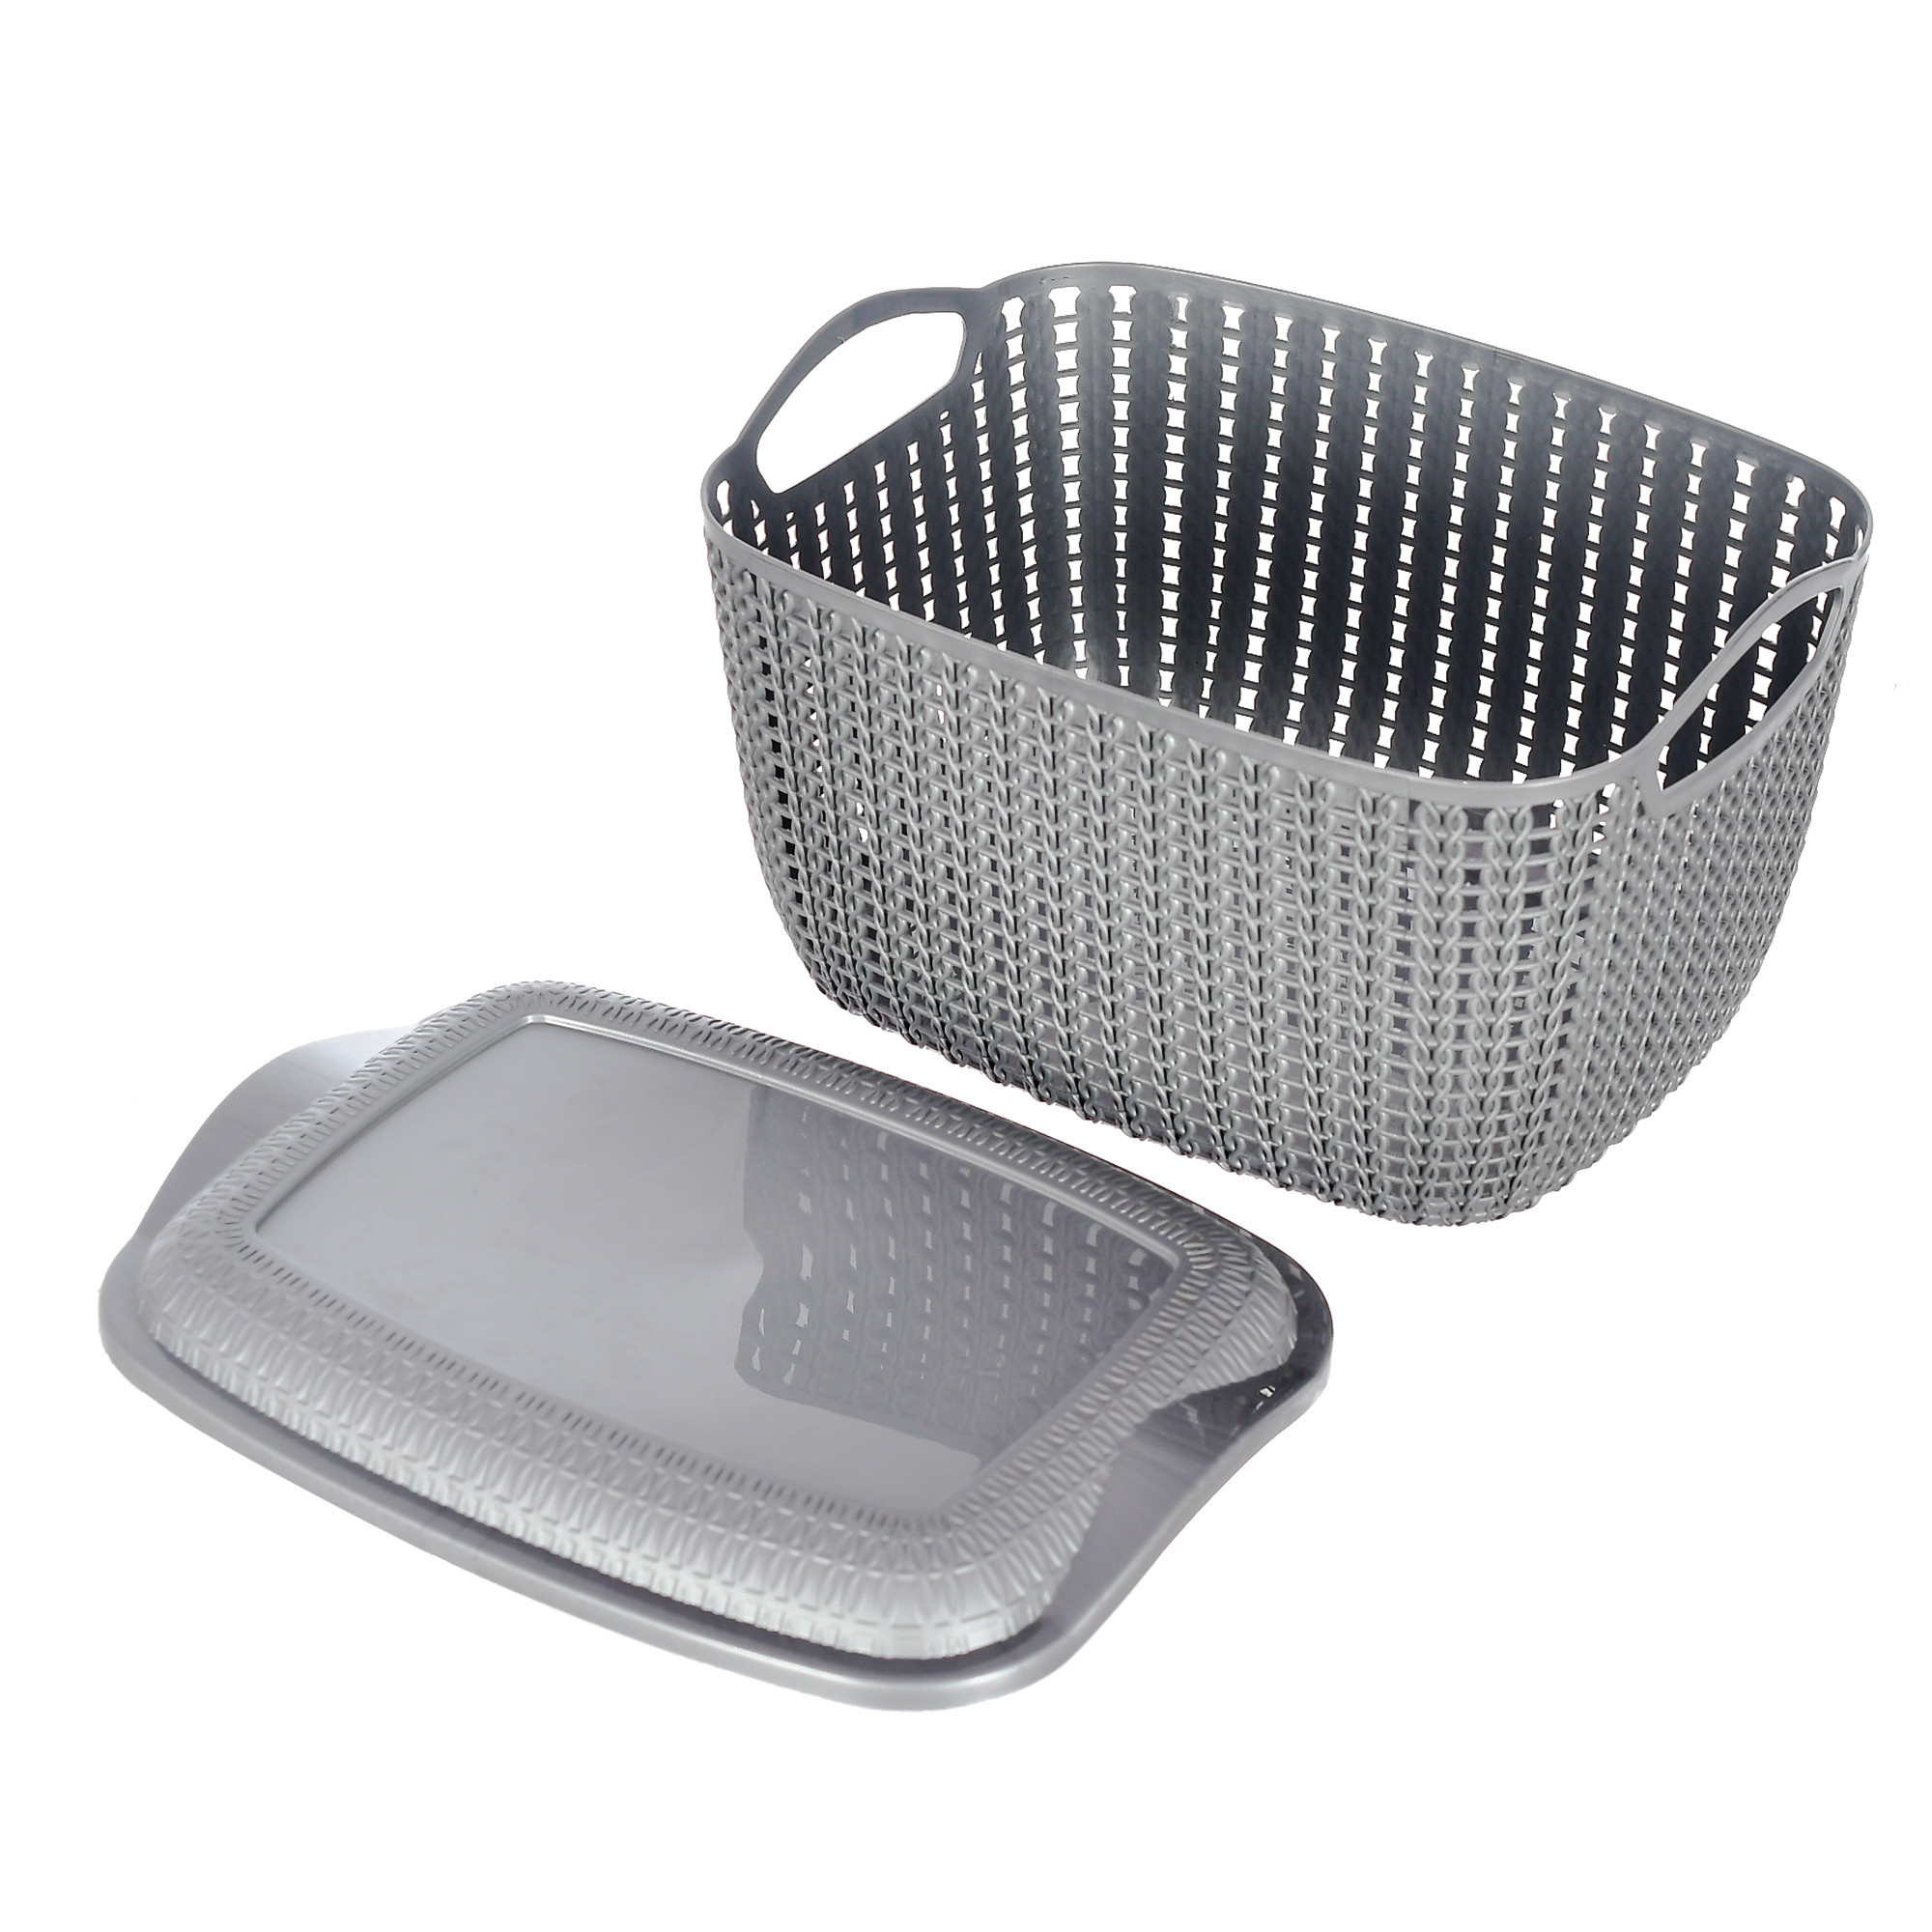 Kuber Industries Multiuses Small M 25 Plastic Basket/Organizer With Lid- Pack of 3 (Brown & Grey & Brown) -46KM047